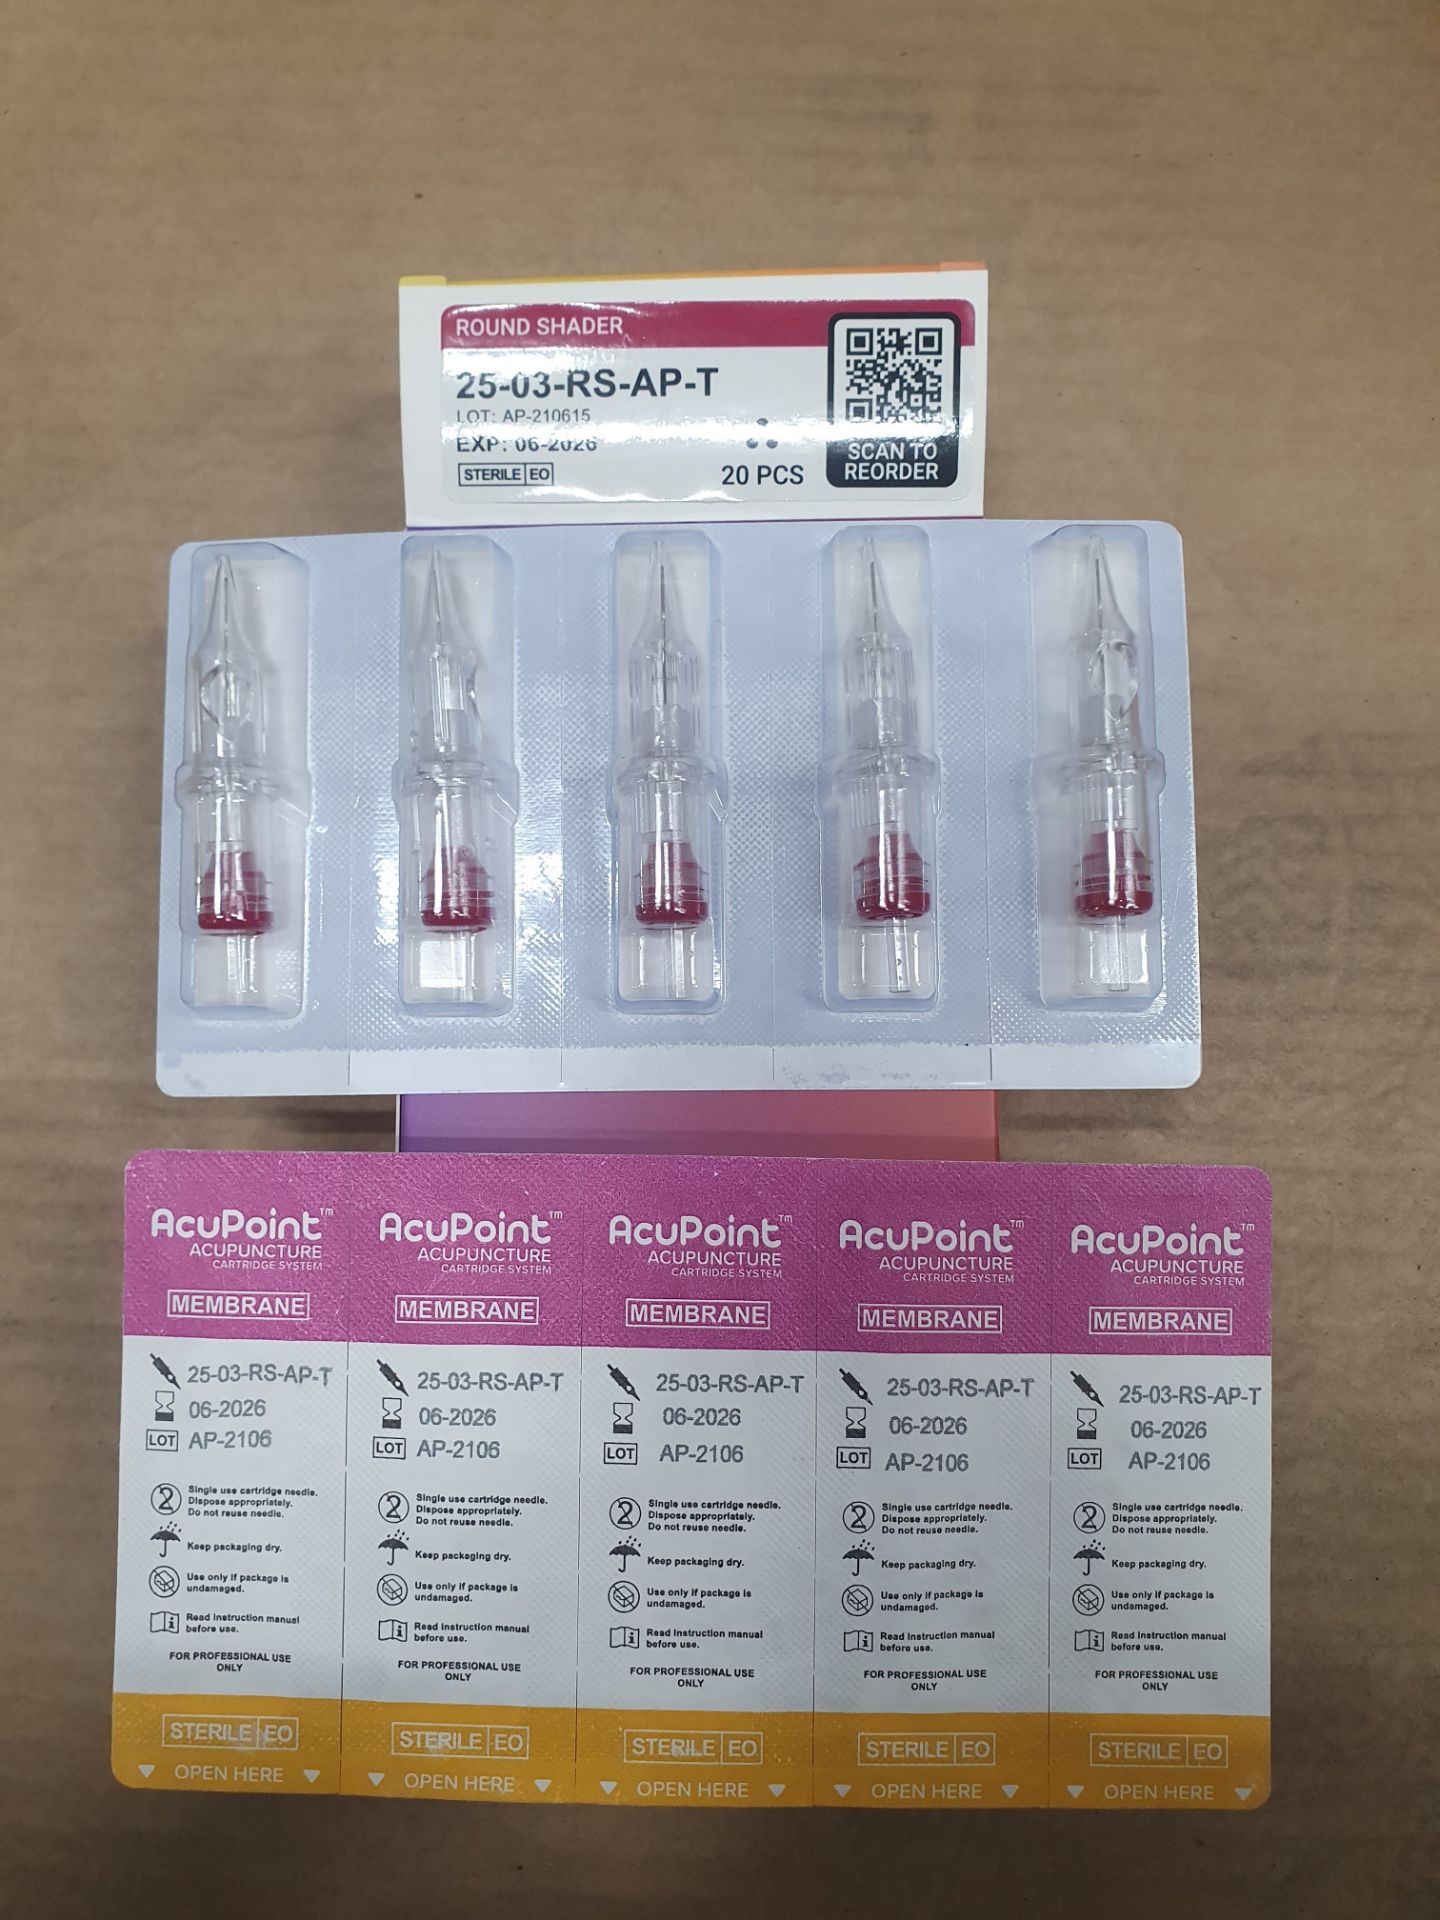 1,000 AcuPoint Accupuncture Cartridge System, exp 03&06/26 - Image 3 of 7